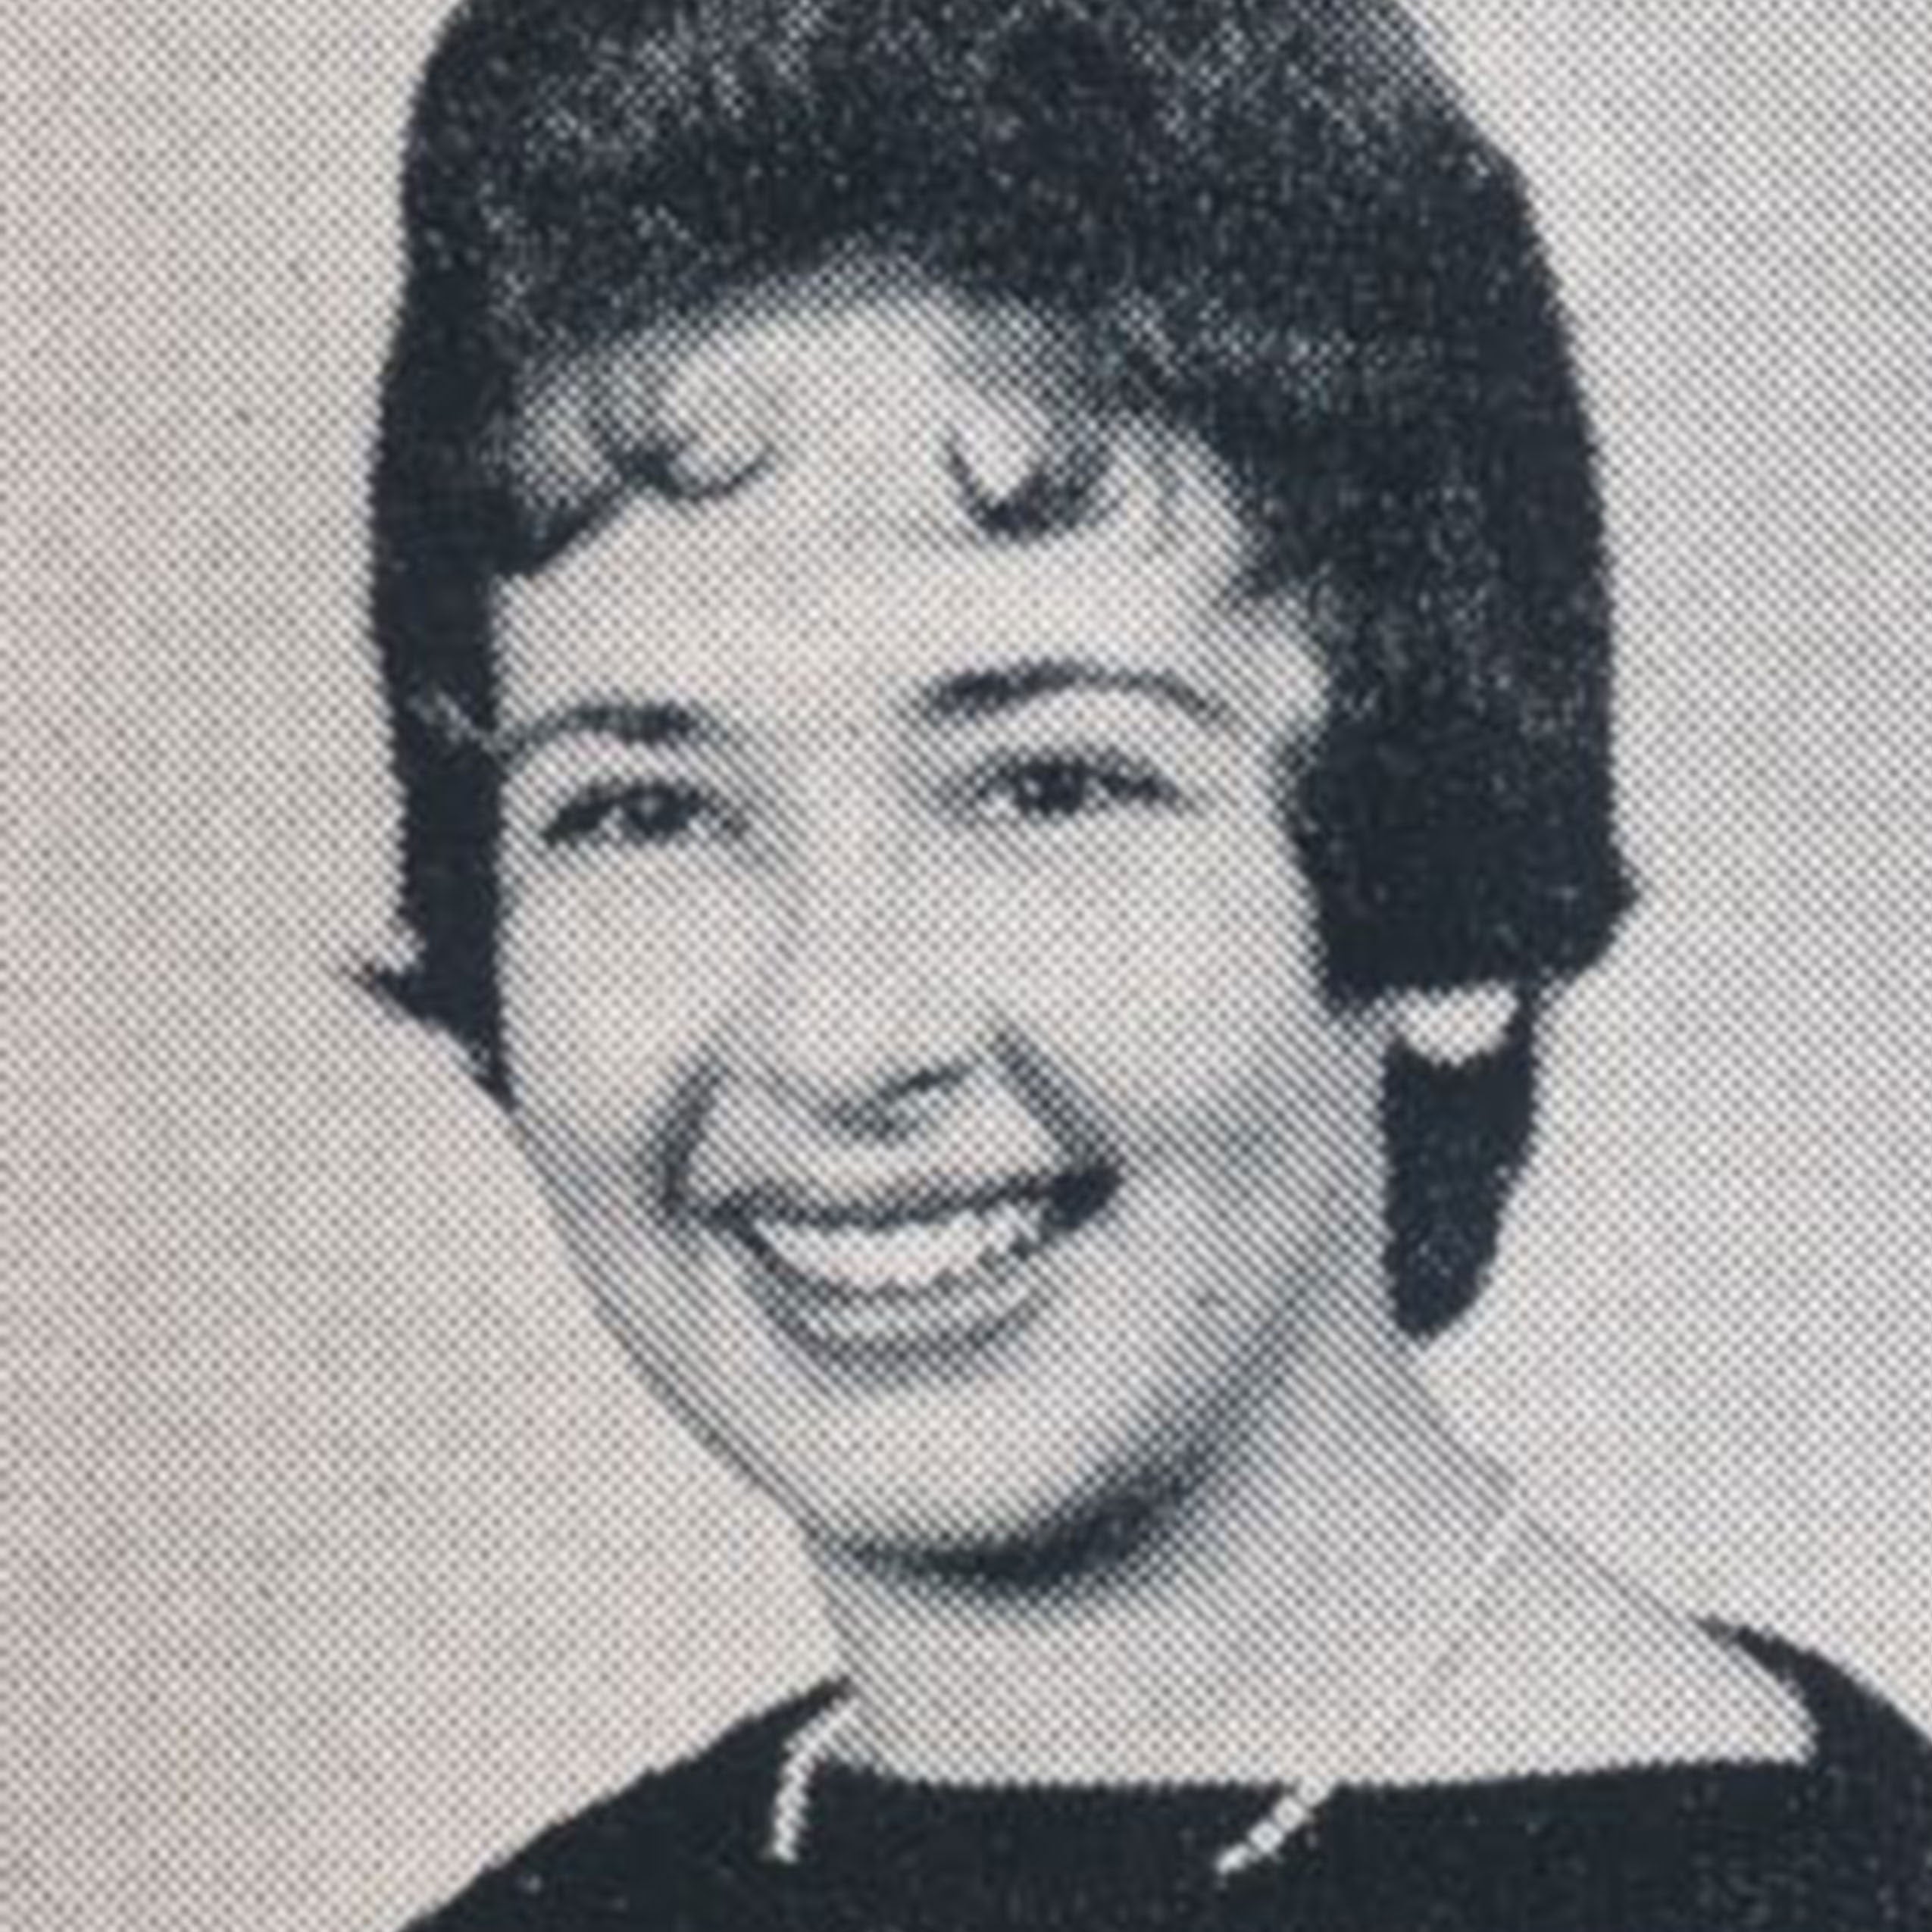 Yearbook photo of Flora Schnall.